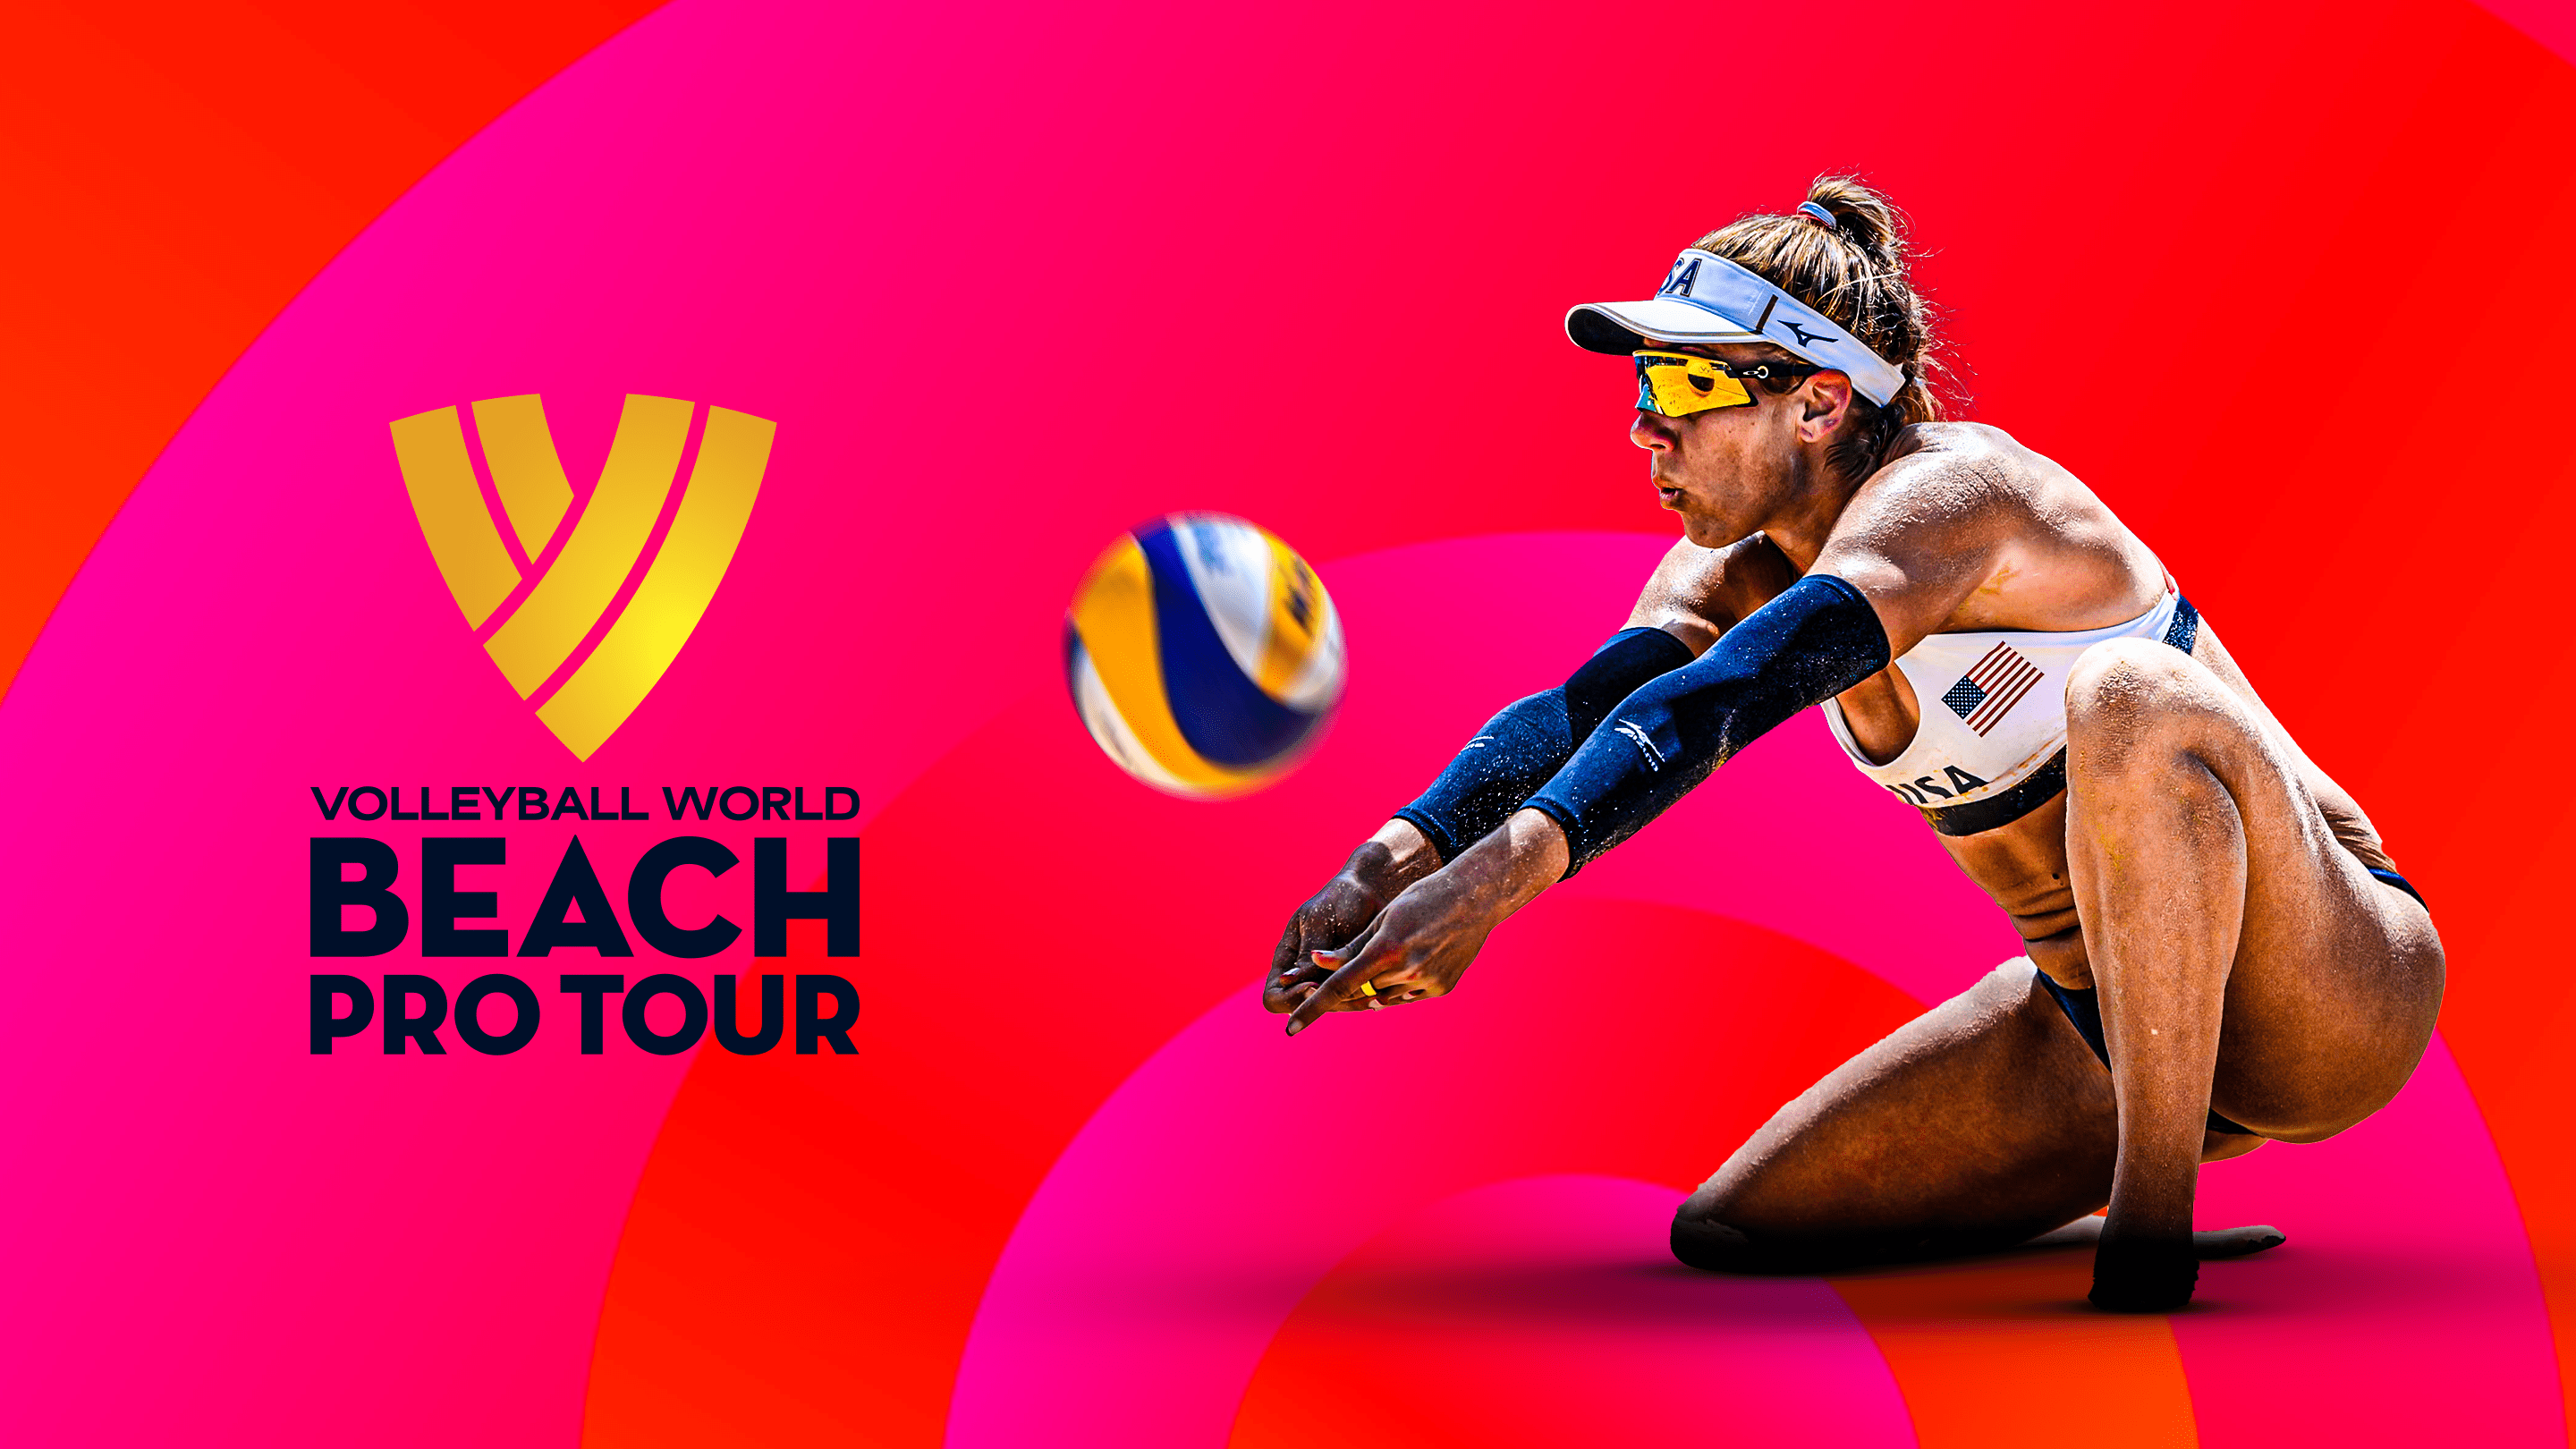 What you need to know about the Beach Pro Tour volleyballworld